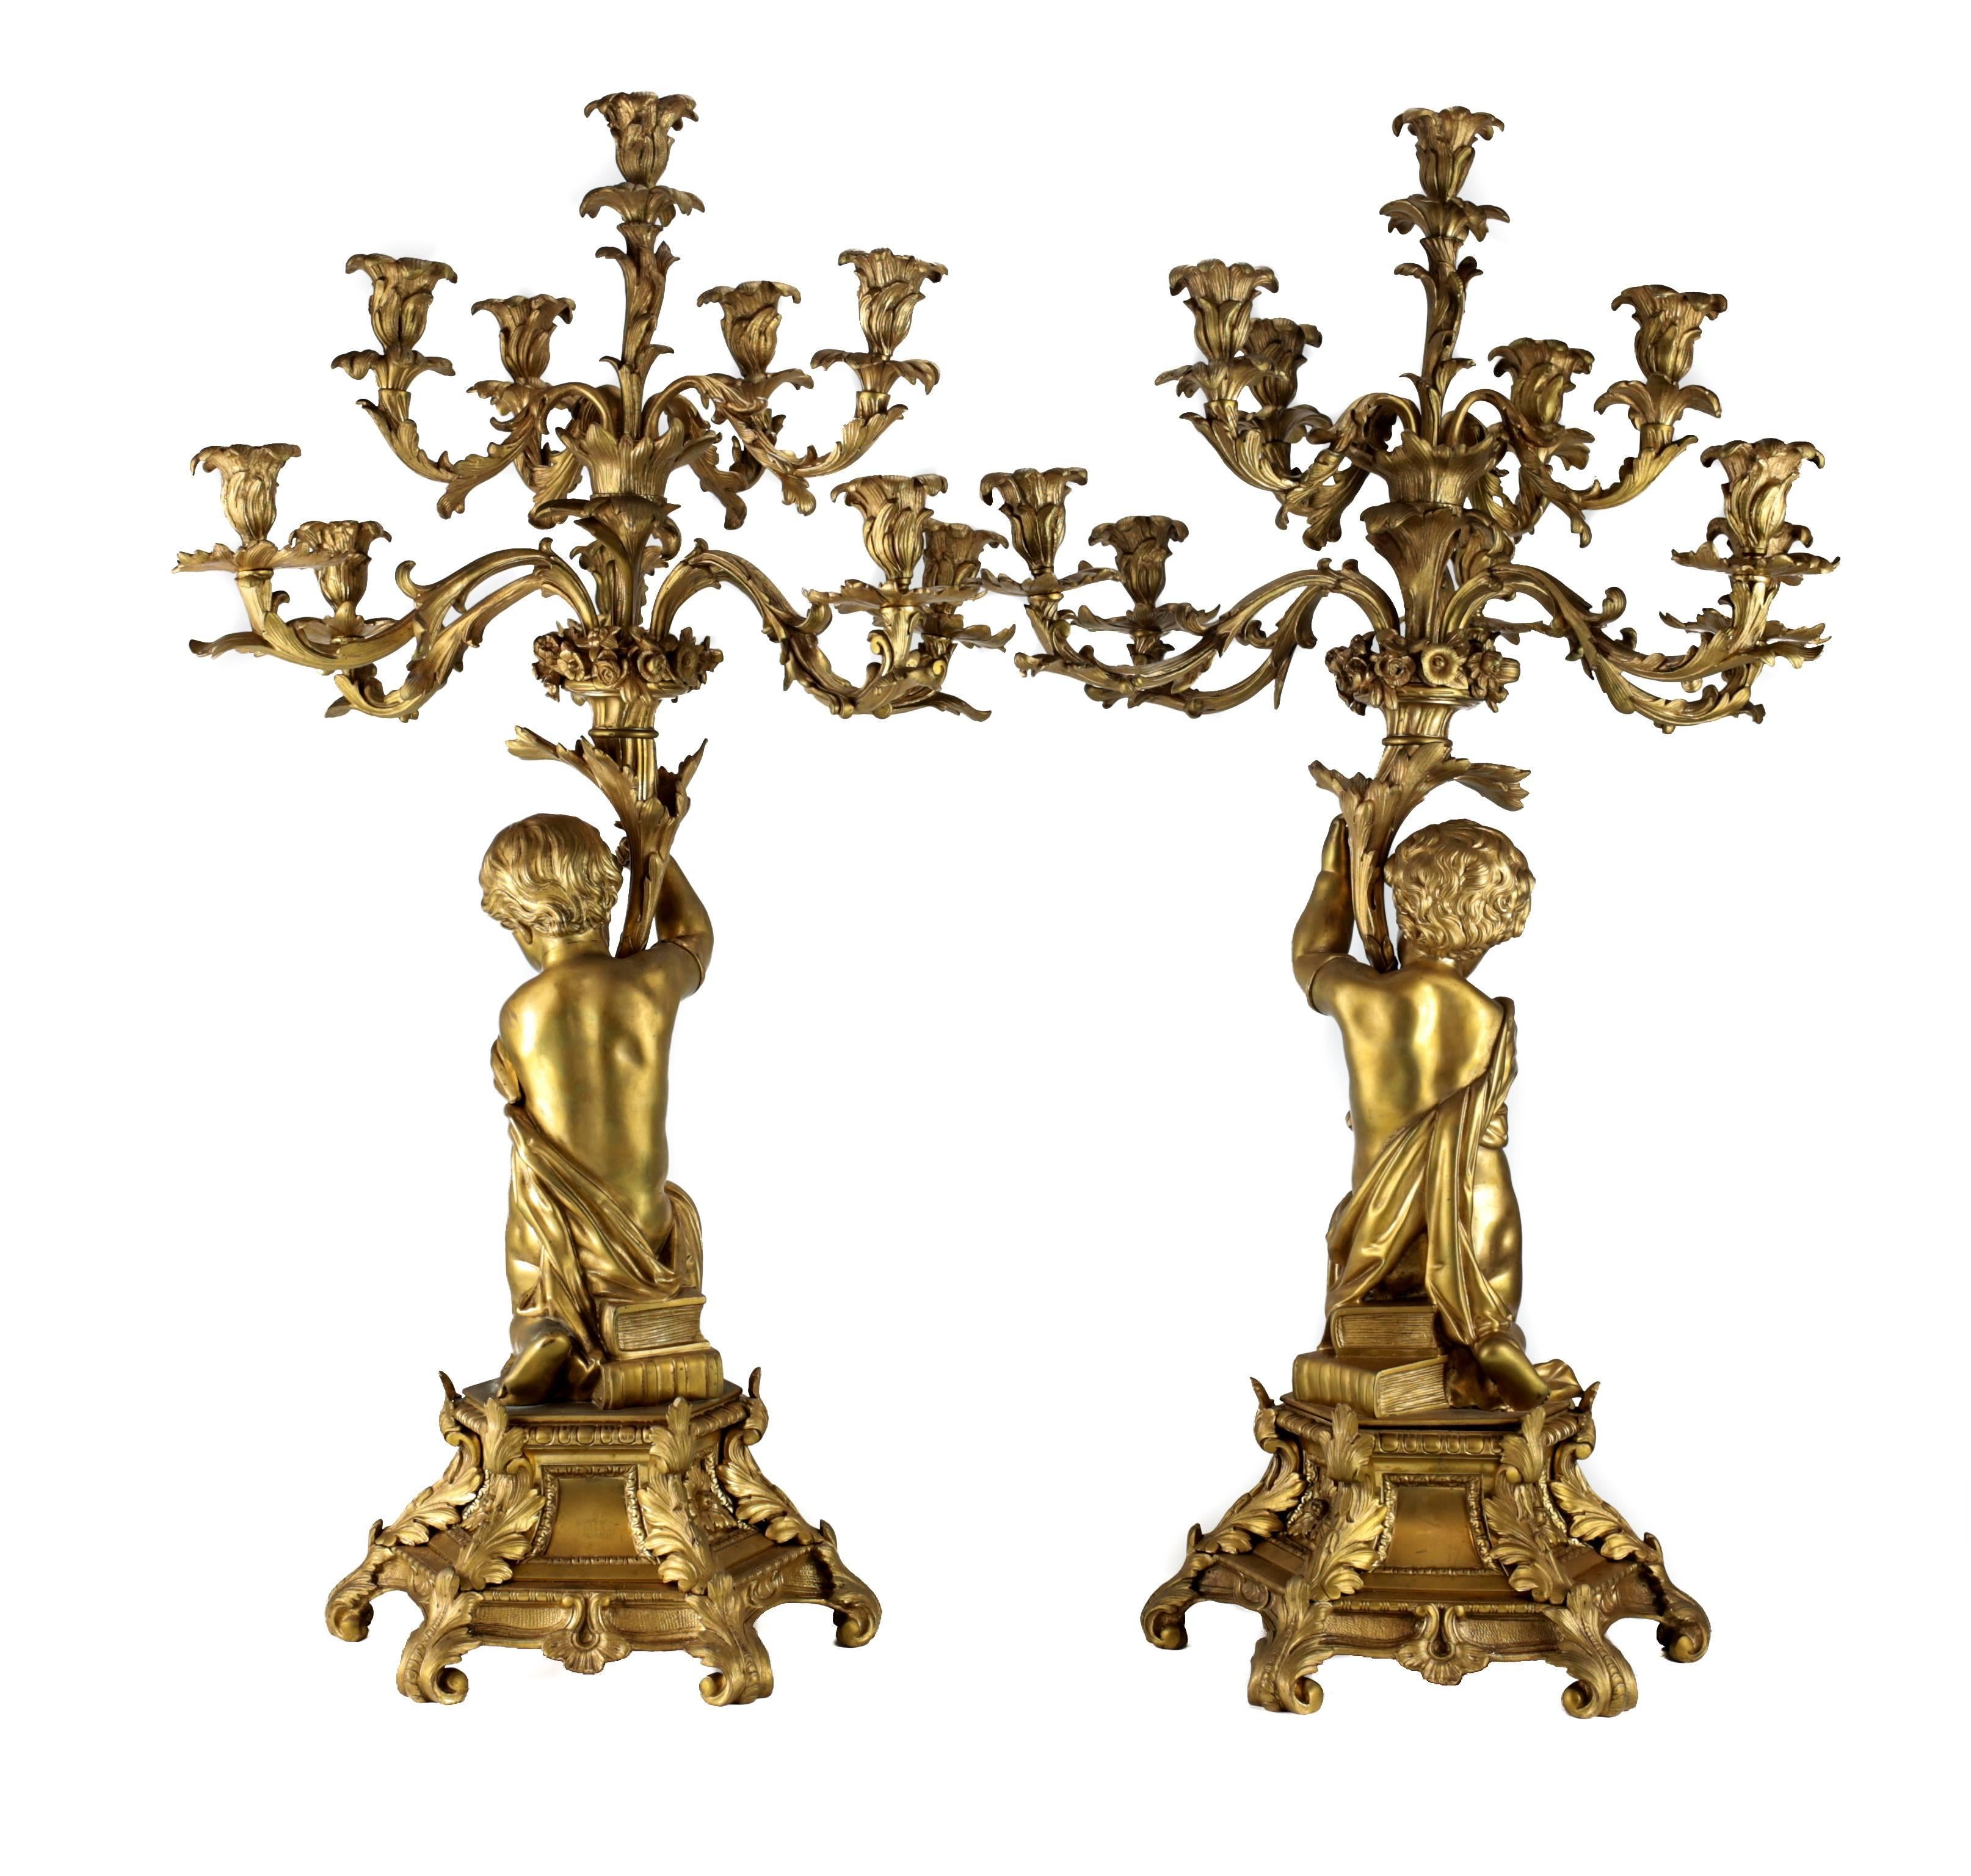 Mid-19th Century Pair of French Napollean IIi Gilt Bronze Figural Ten-Light Candelabras